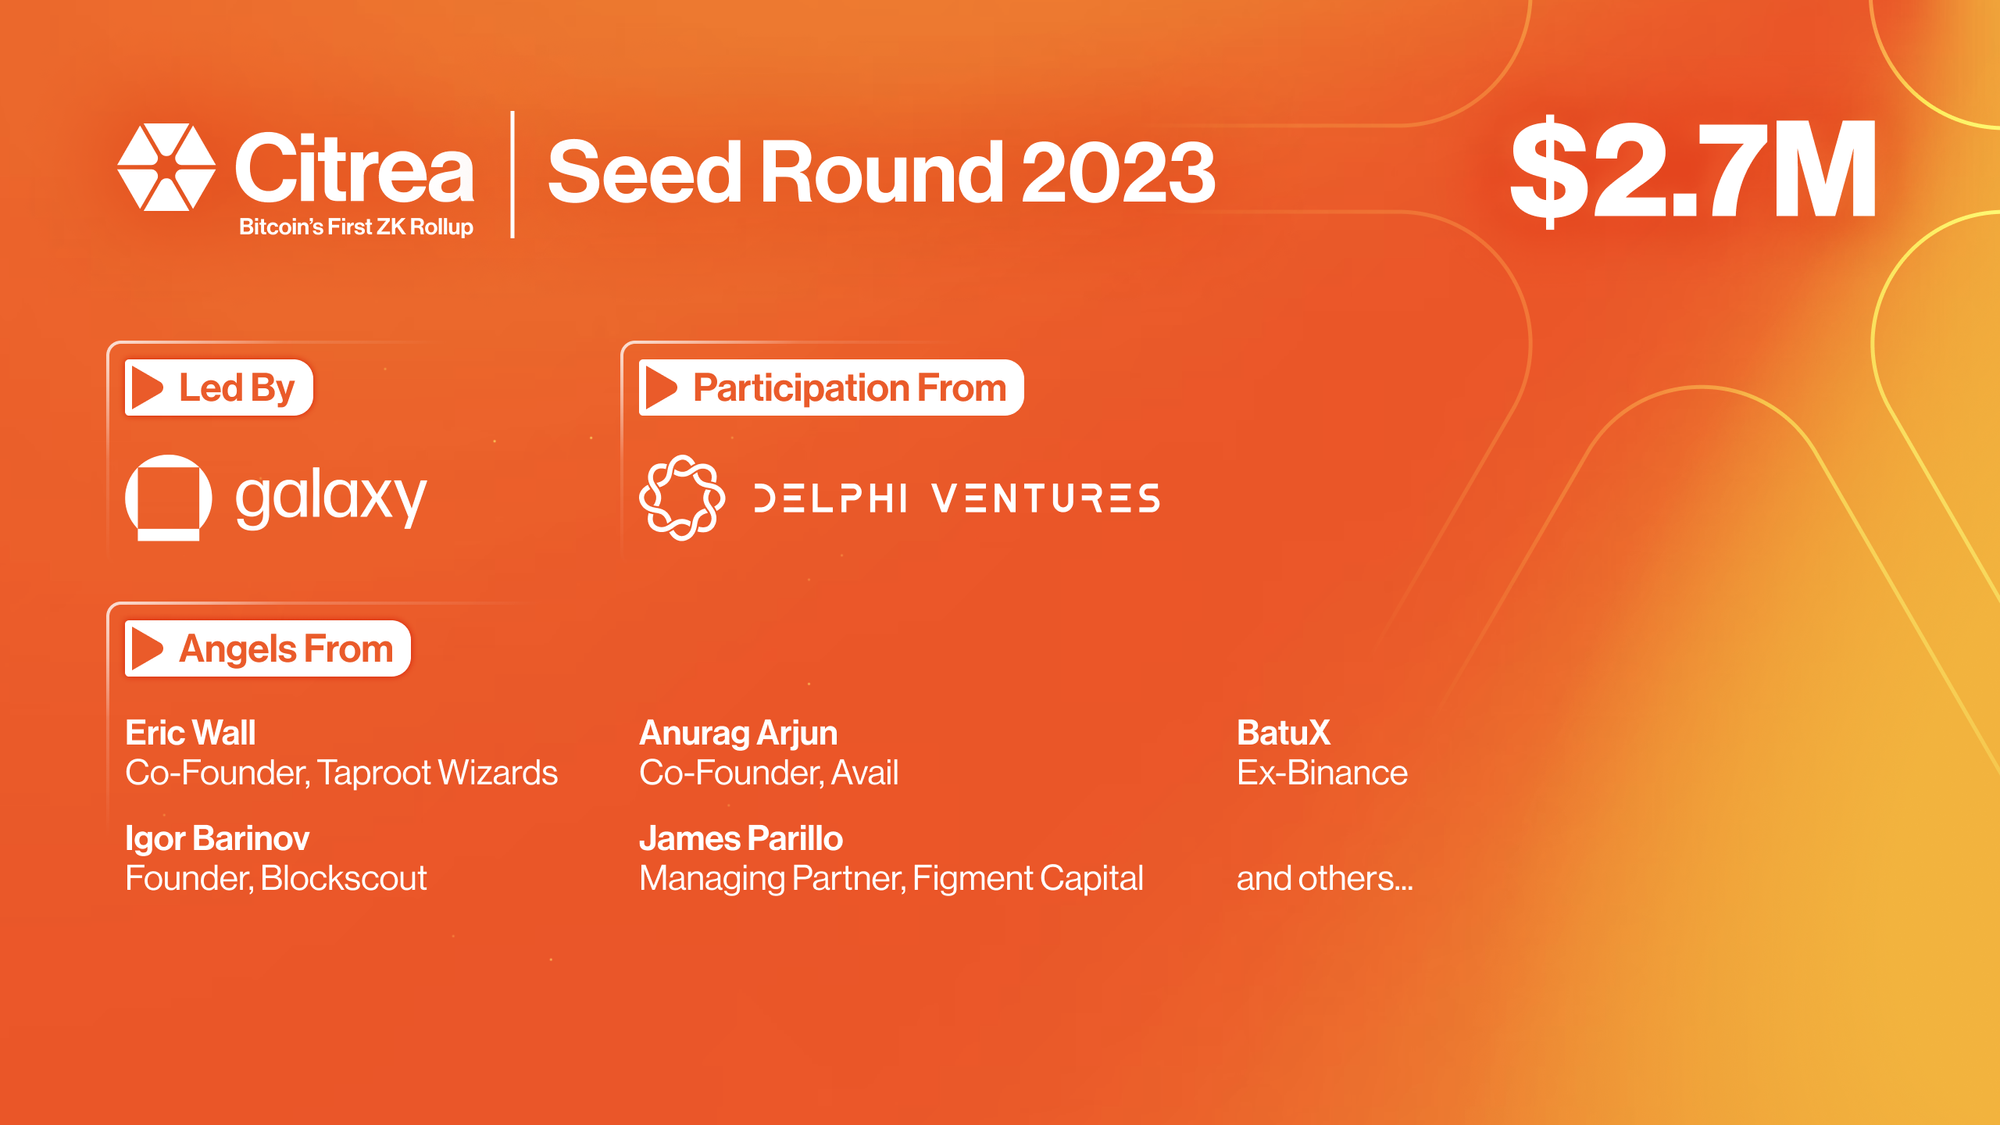 Announcing Our $2.7M Seed Round To Launch Bitcoin’s First ZK Rollup